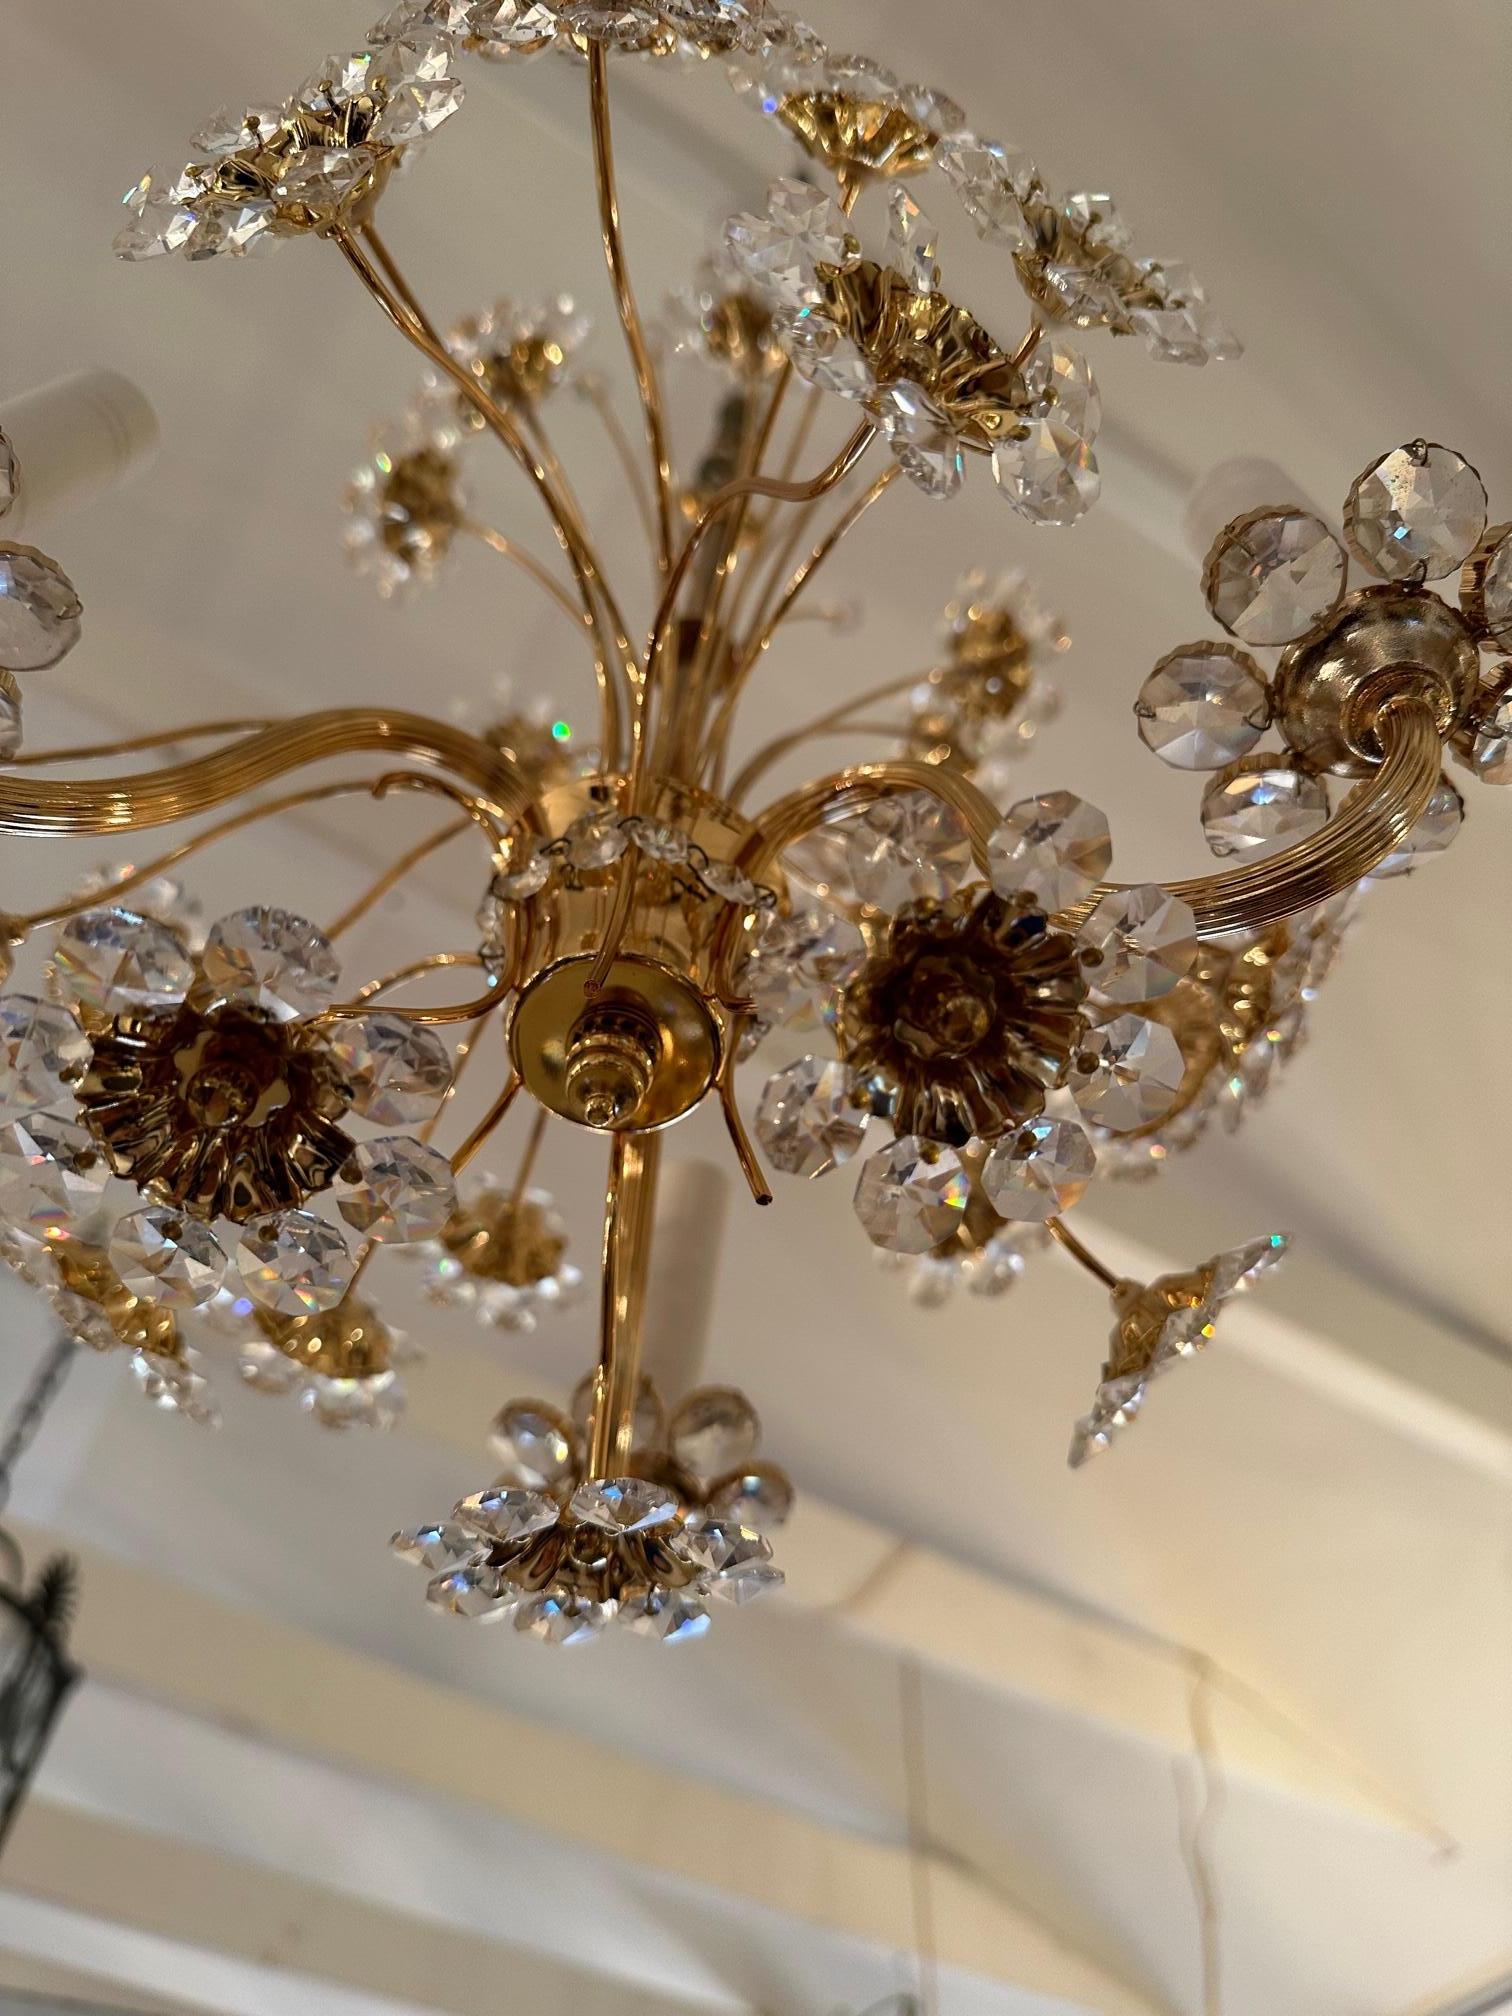 Elegant glistening flower motif German vintage chandelier having delicate 24 carat plated stems and floral centers with crystal petals. 3 arms.
Measures: 24